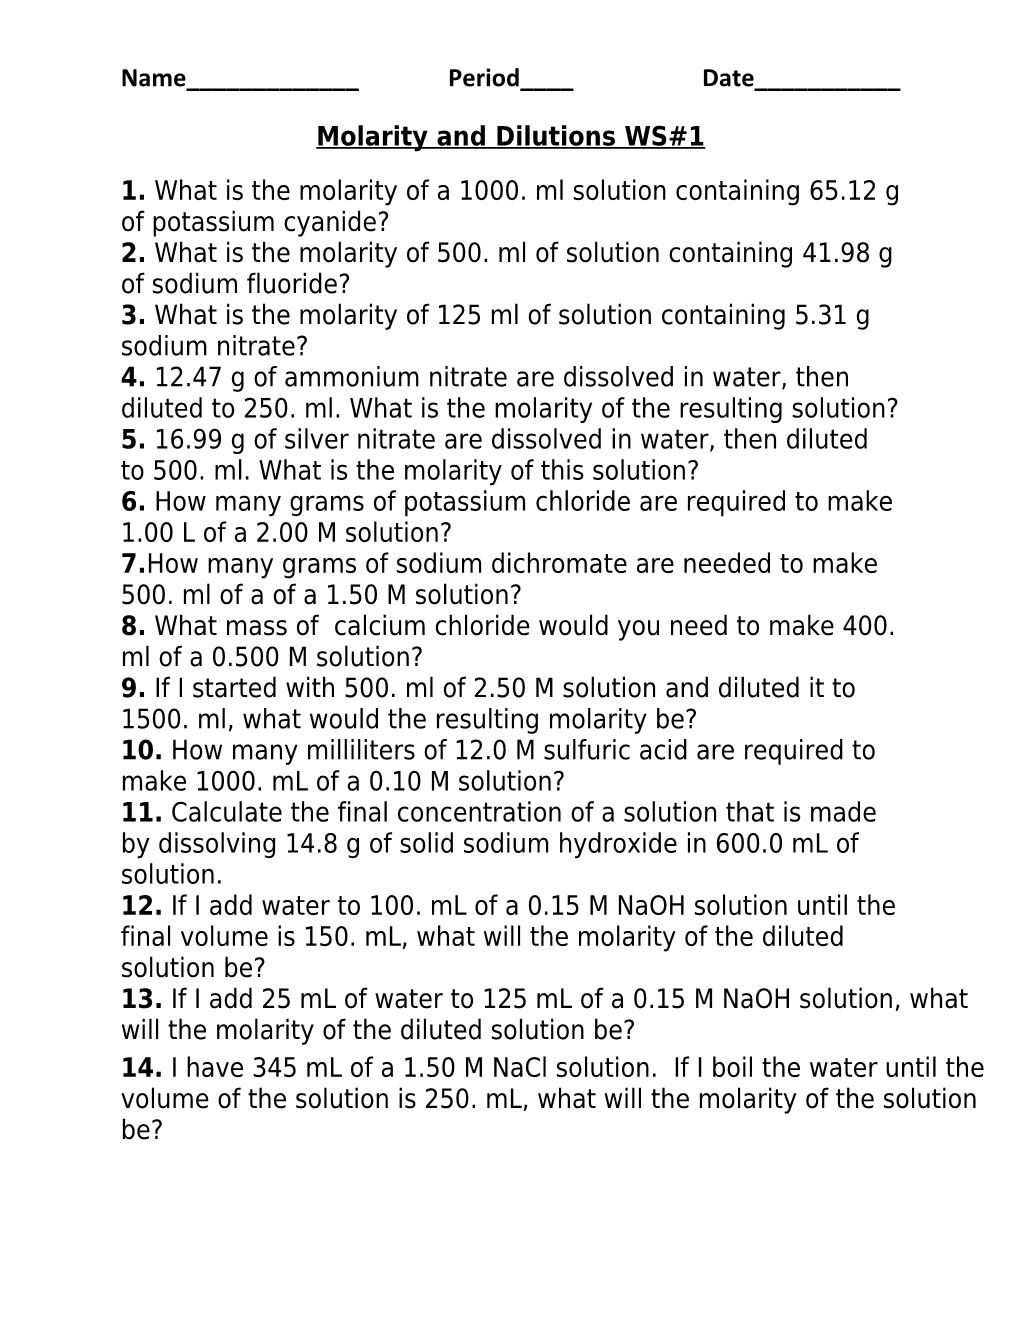 Molarity and Dilutions WS#1